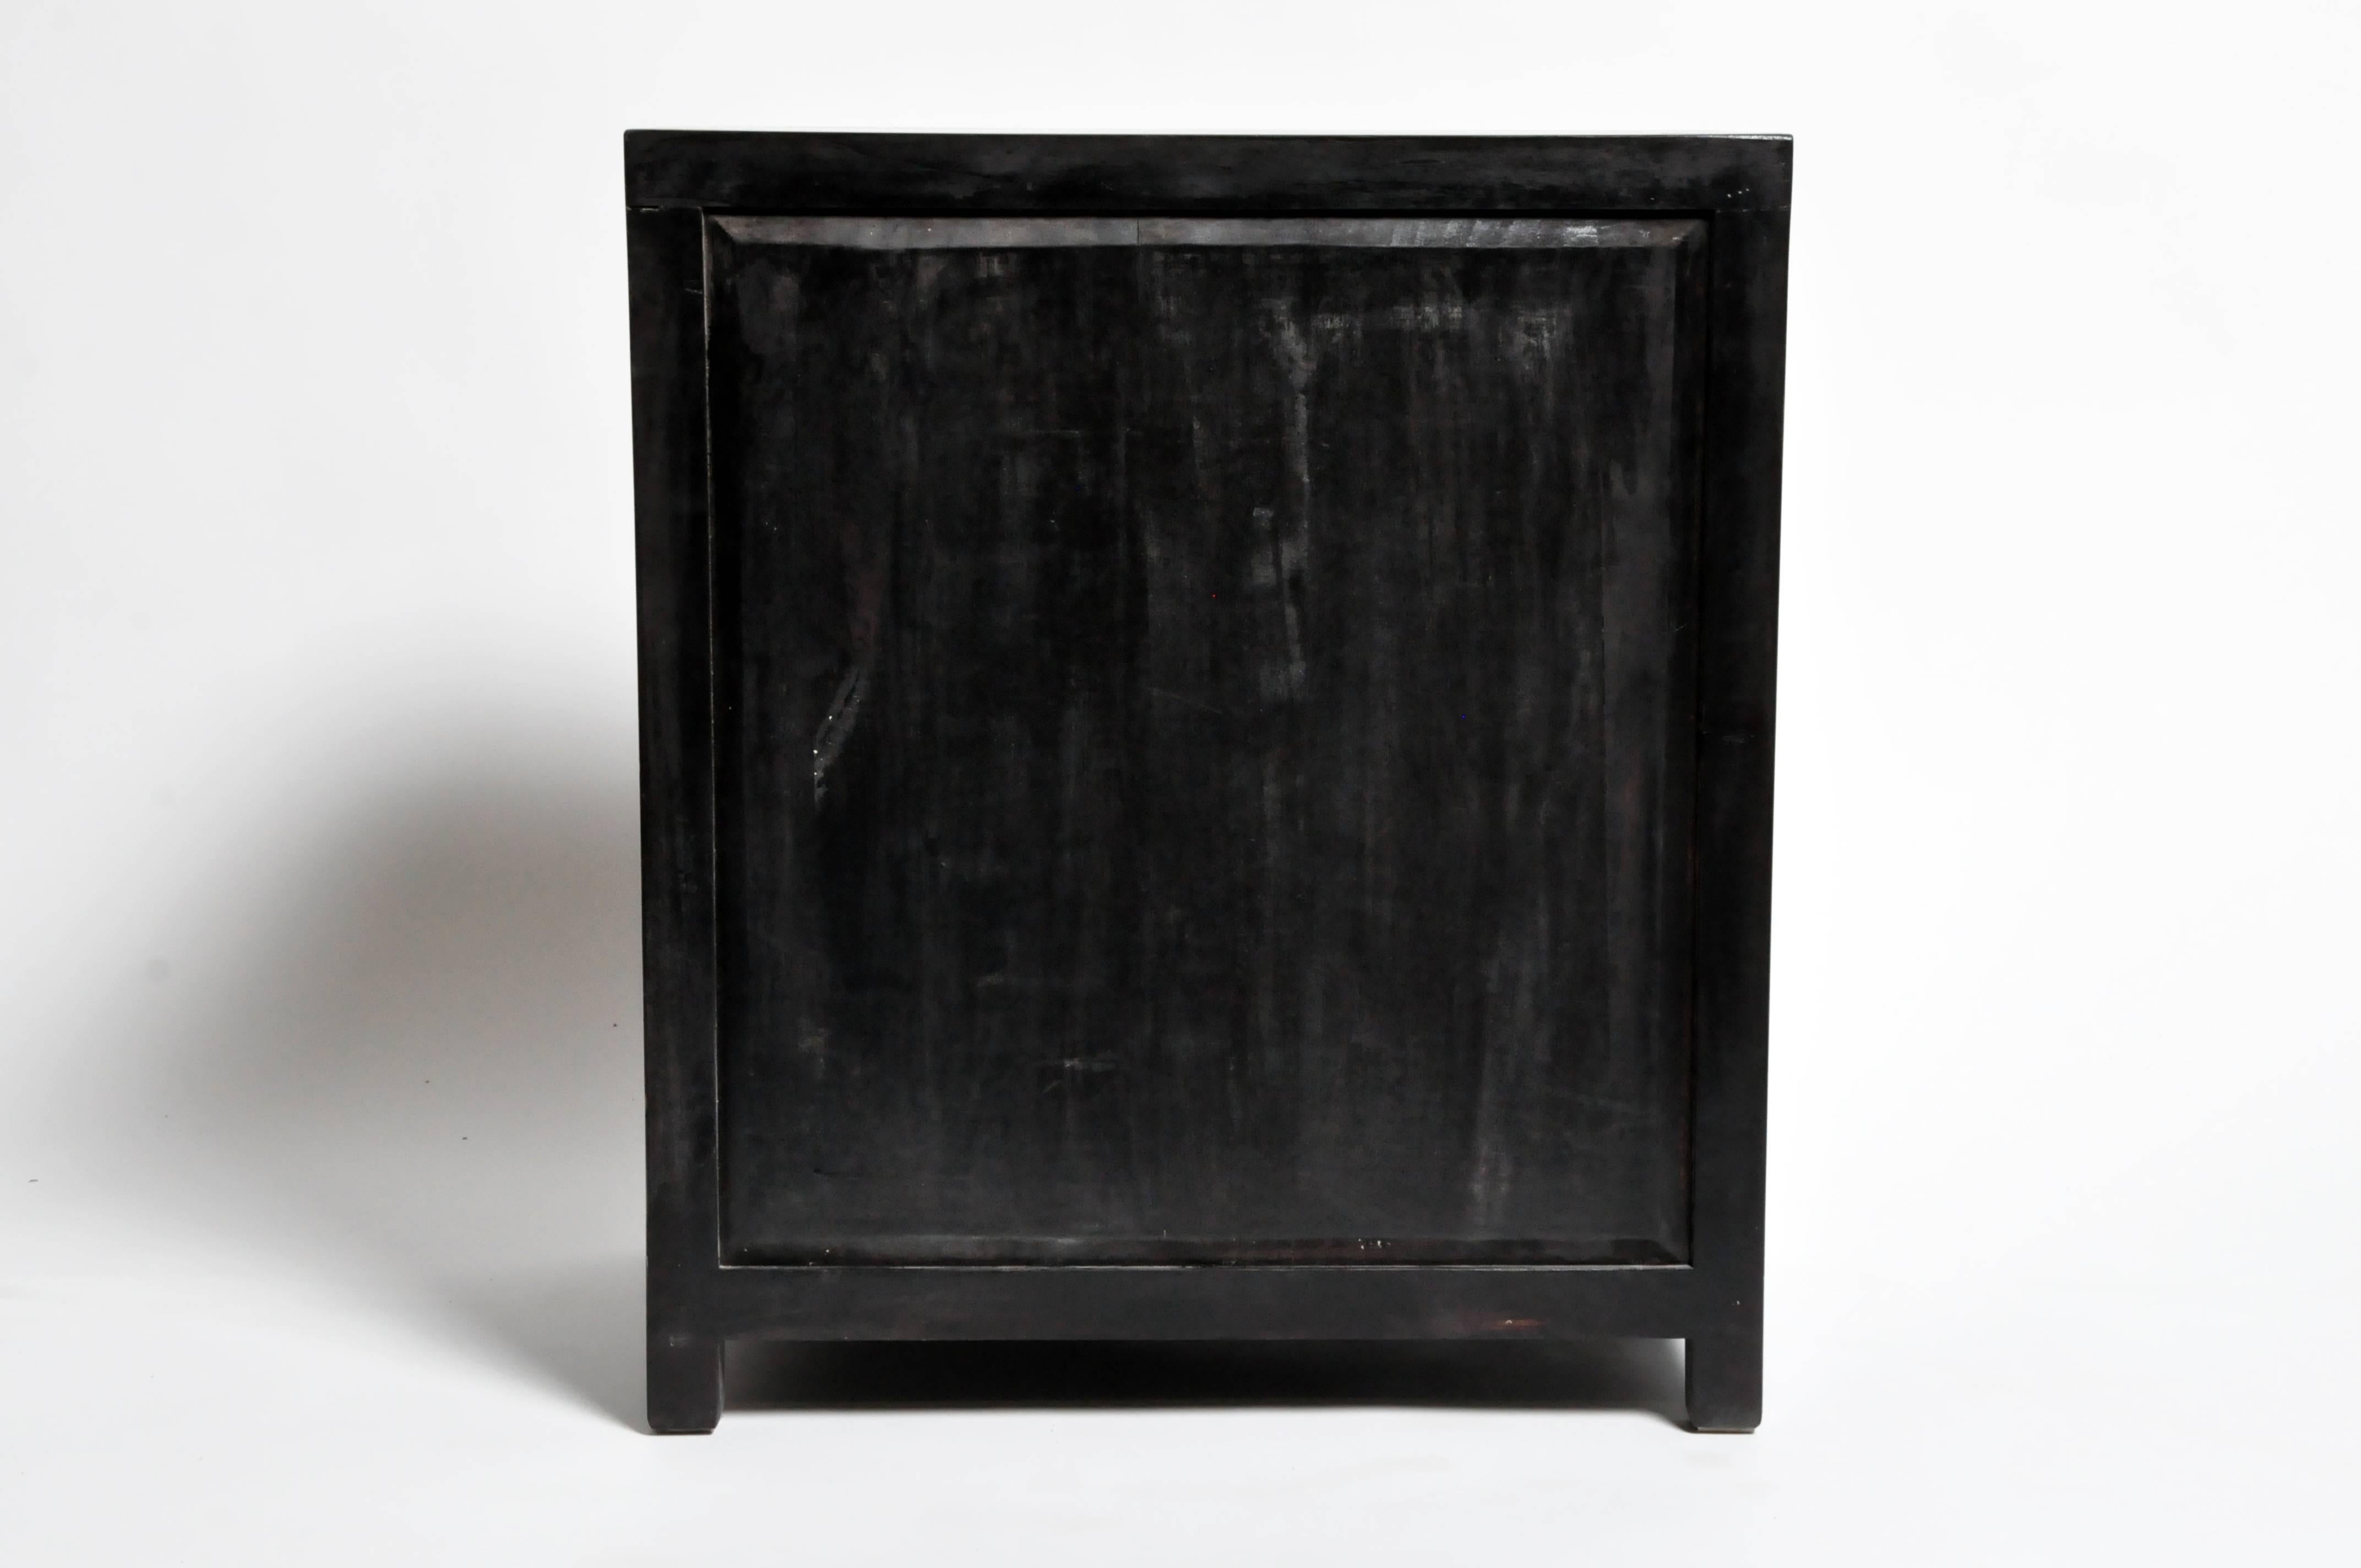 This pair of side chests are from Ningbo, China and were made from reclaimed elmwood. They both feature mortise and tenon joinery, two drawers, and a shelf below for additional storage. You can also customize a new one and make it your own. Wood,